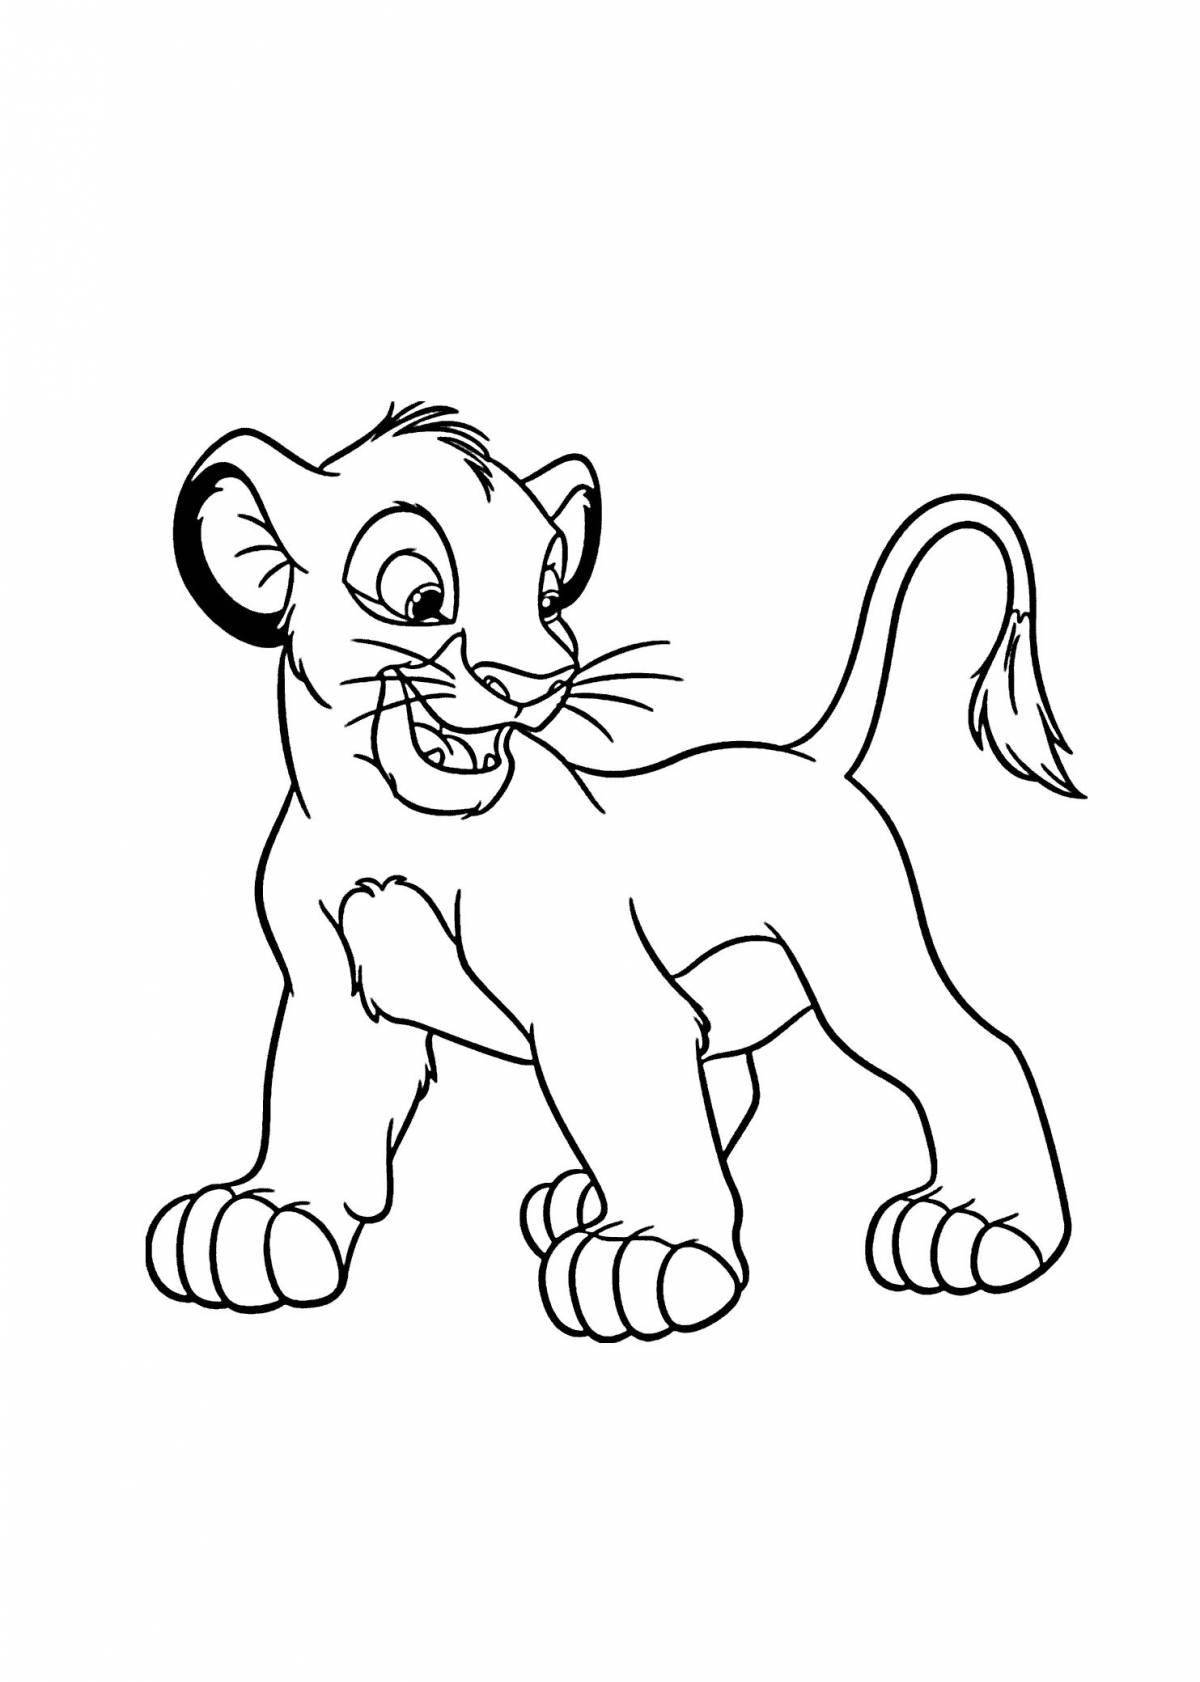 Simba funny coloring book for kids